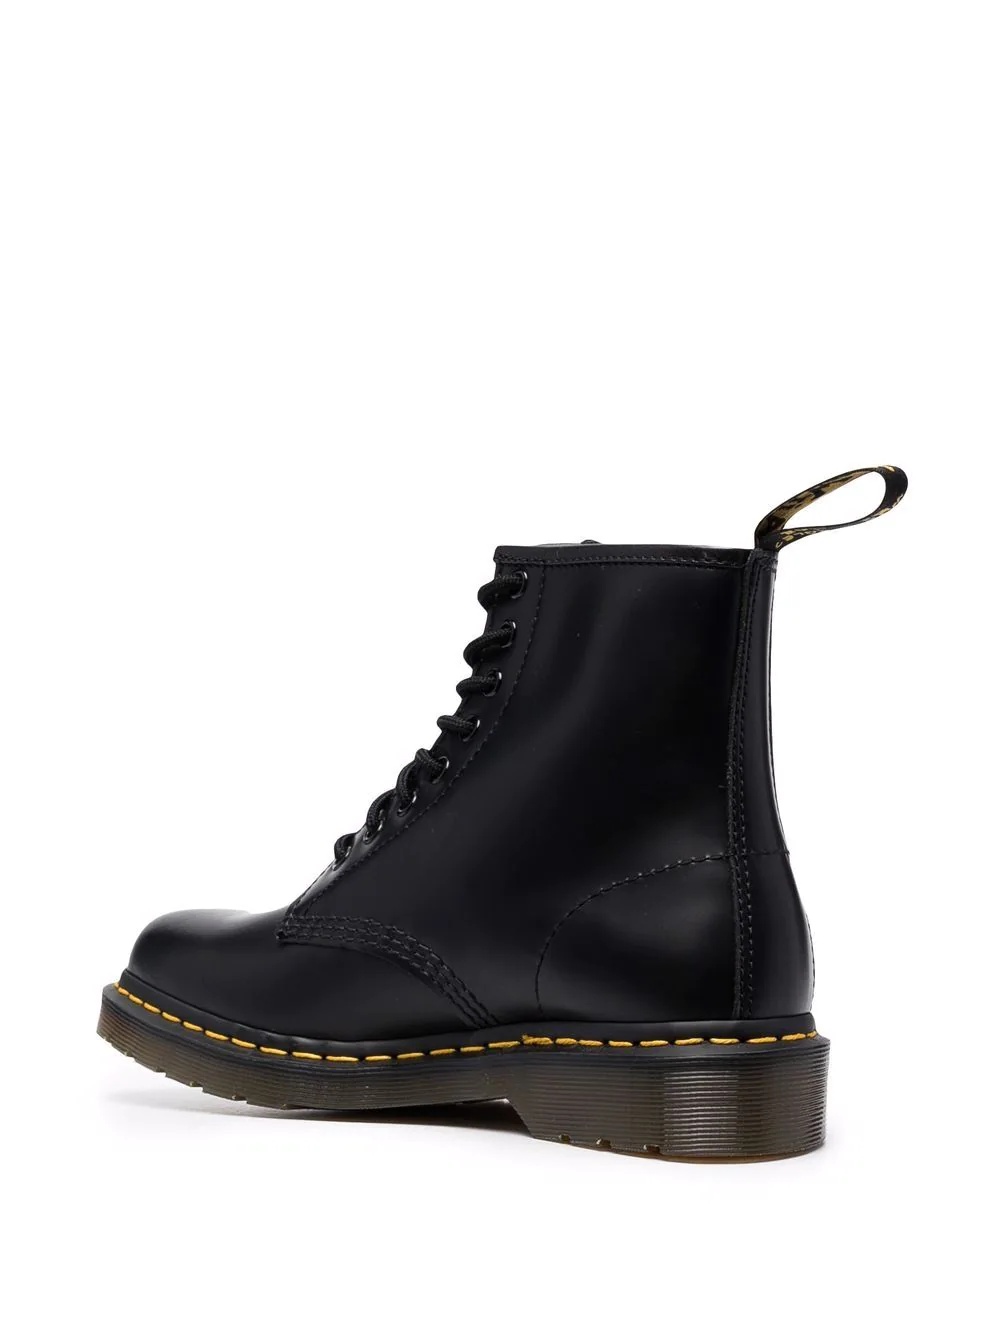 DR. MARTENS 1460 Smooth Leather Lace Up Boots - 3